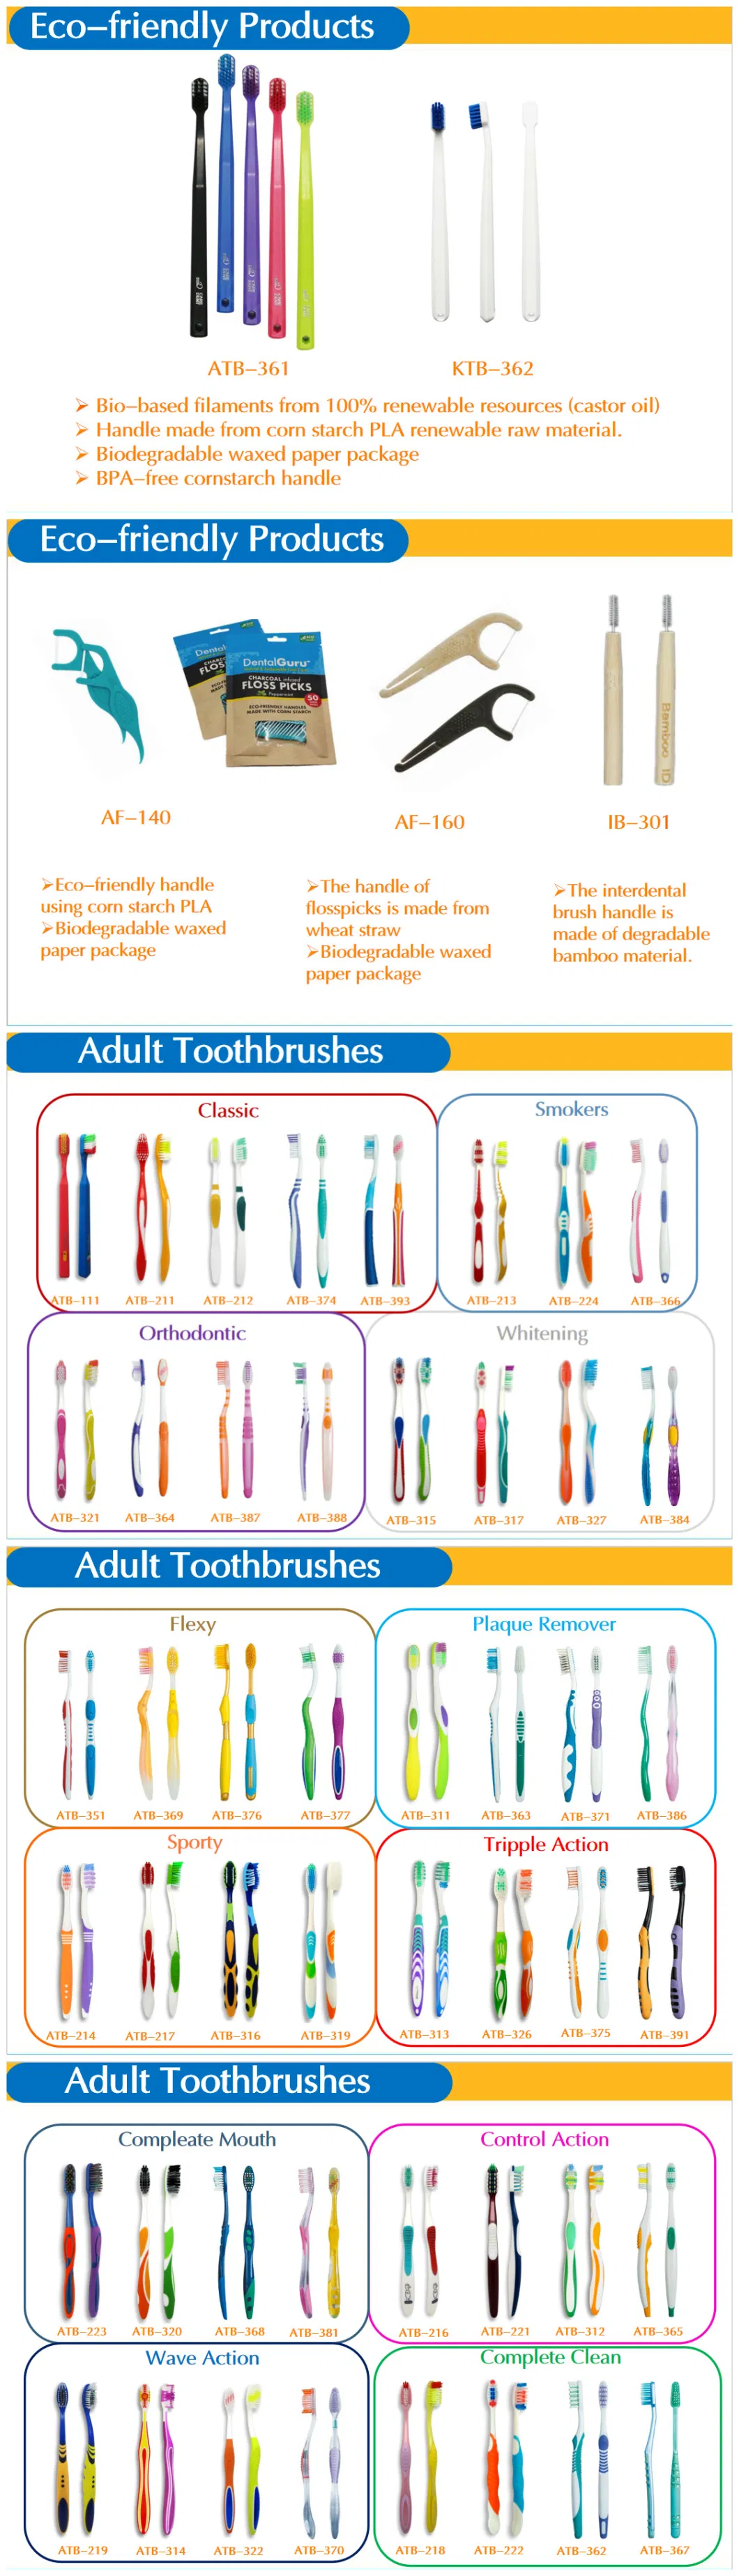 OEM Multi Action Handle Complete Clean Adult Toothbrush/Tooth Brush with Customized Colors, Bristles and Package